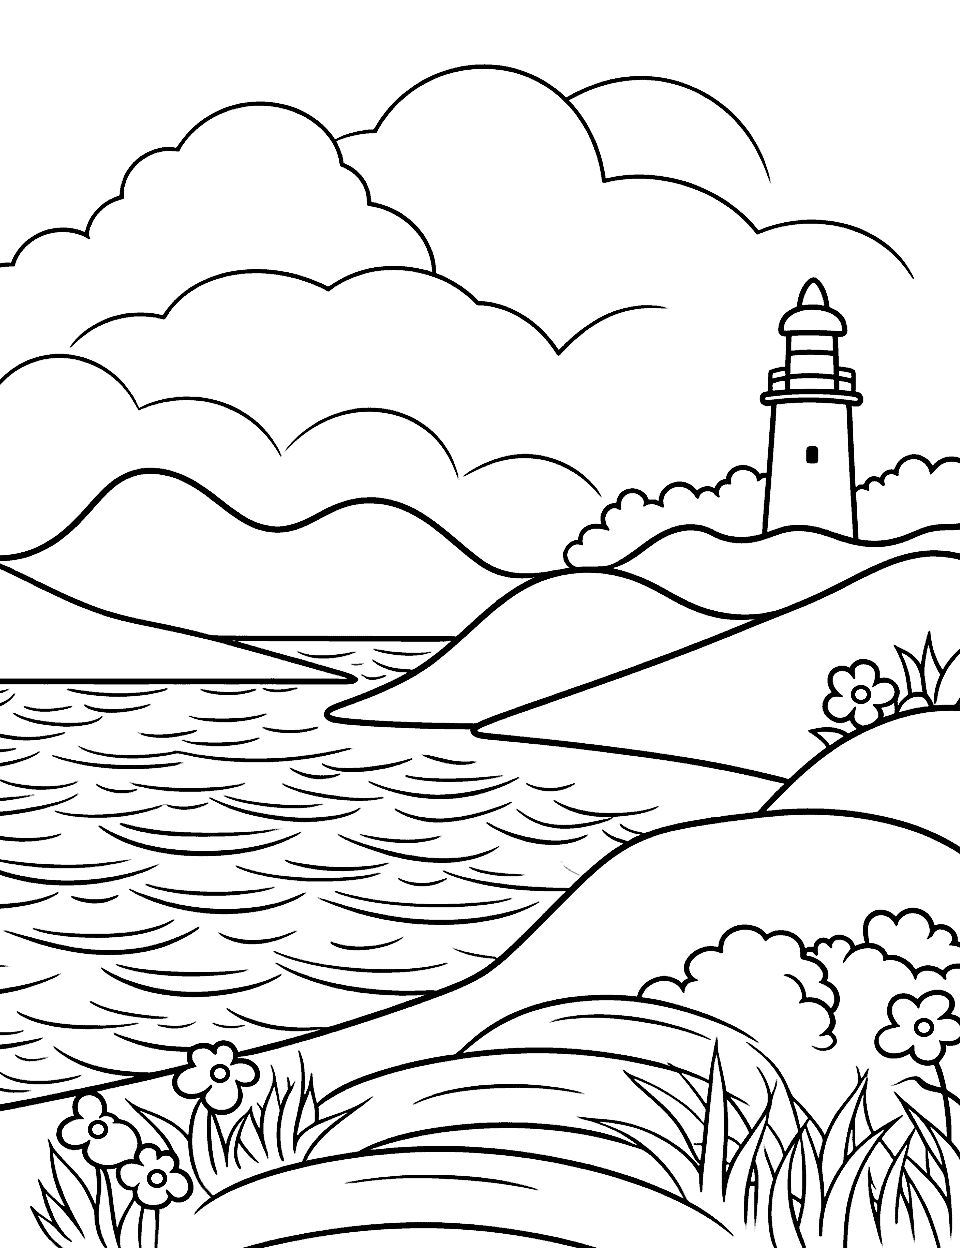 Lighthouse by the Sea Nature Coloring Page - A lighthouse standing tall by the sea shore.